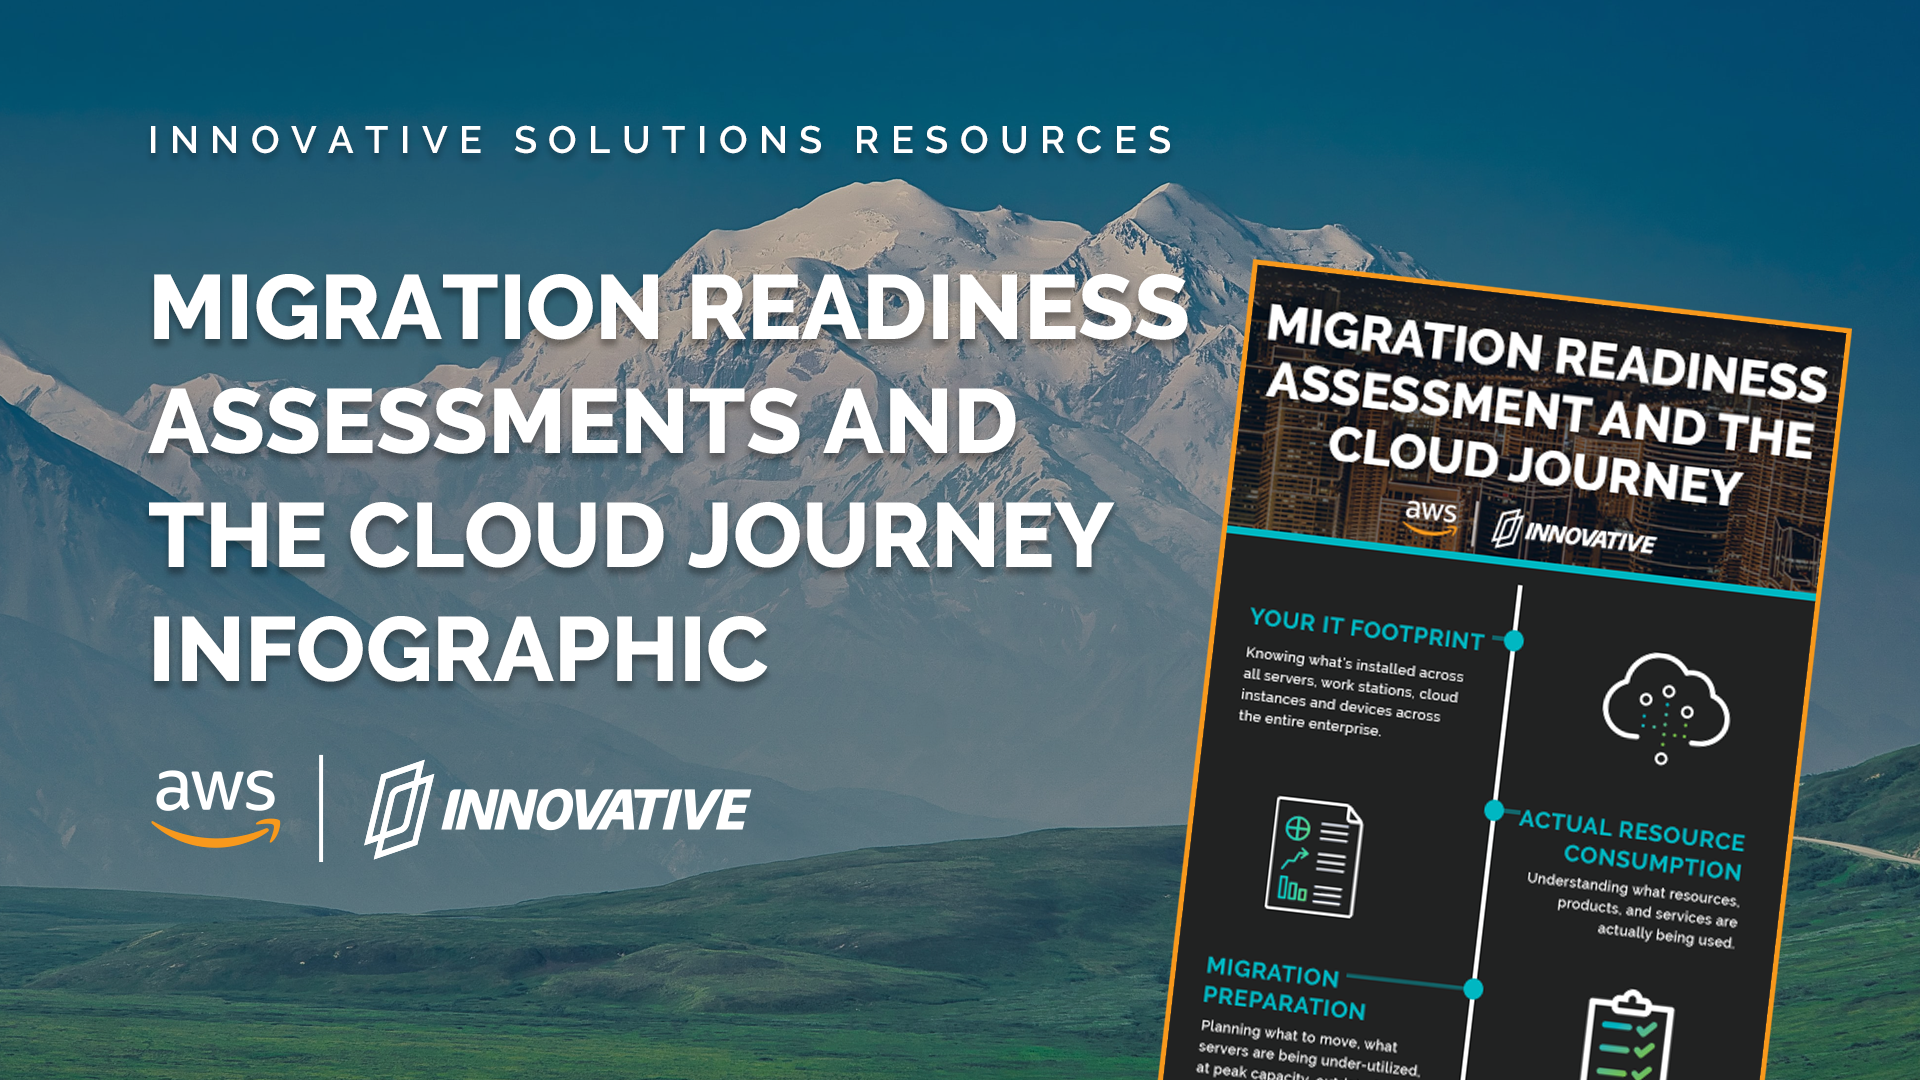 Migration Readiness Assessment and the Cloud Journey Infographic